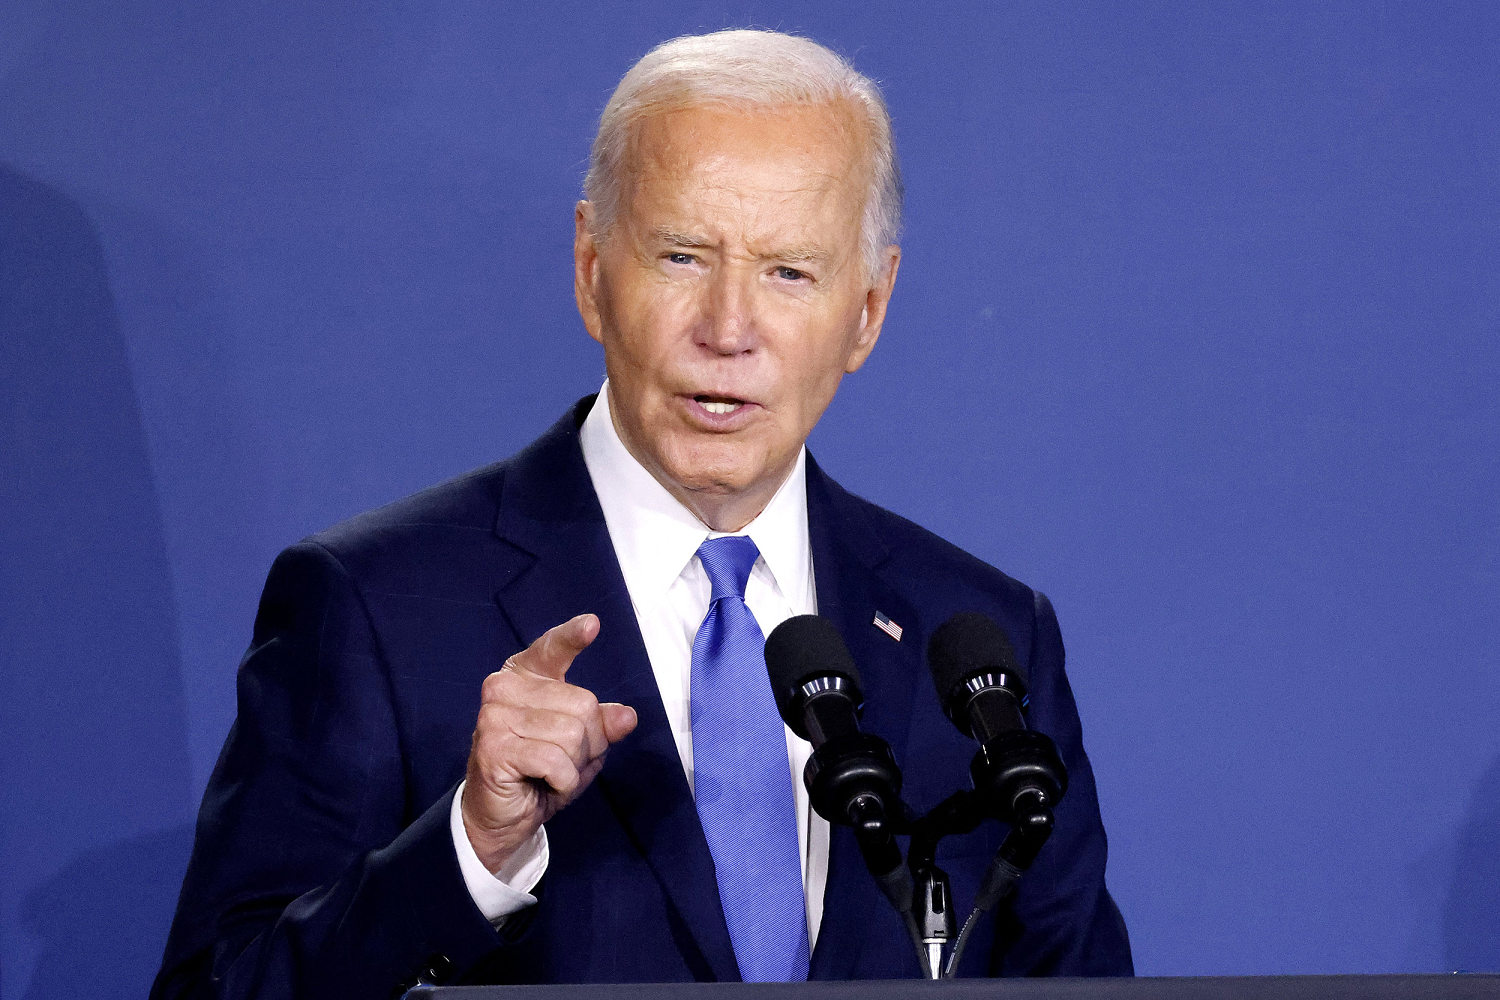 More Democrats call on Biden to step aside from 2024 race after his news conference